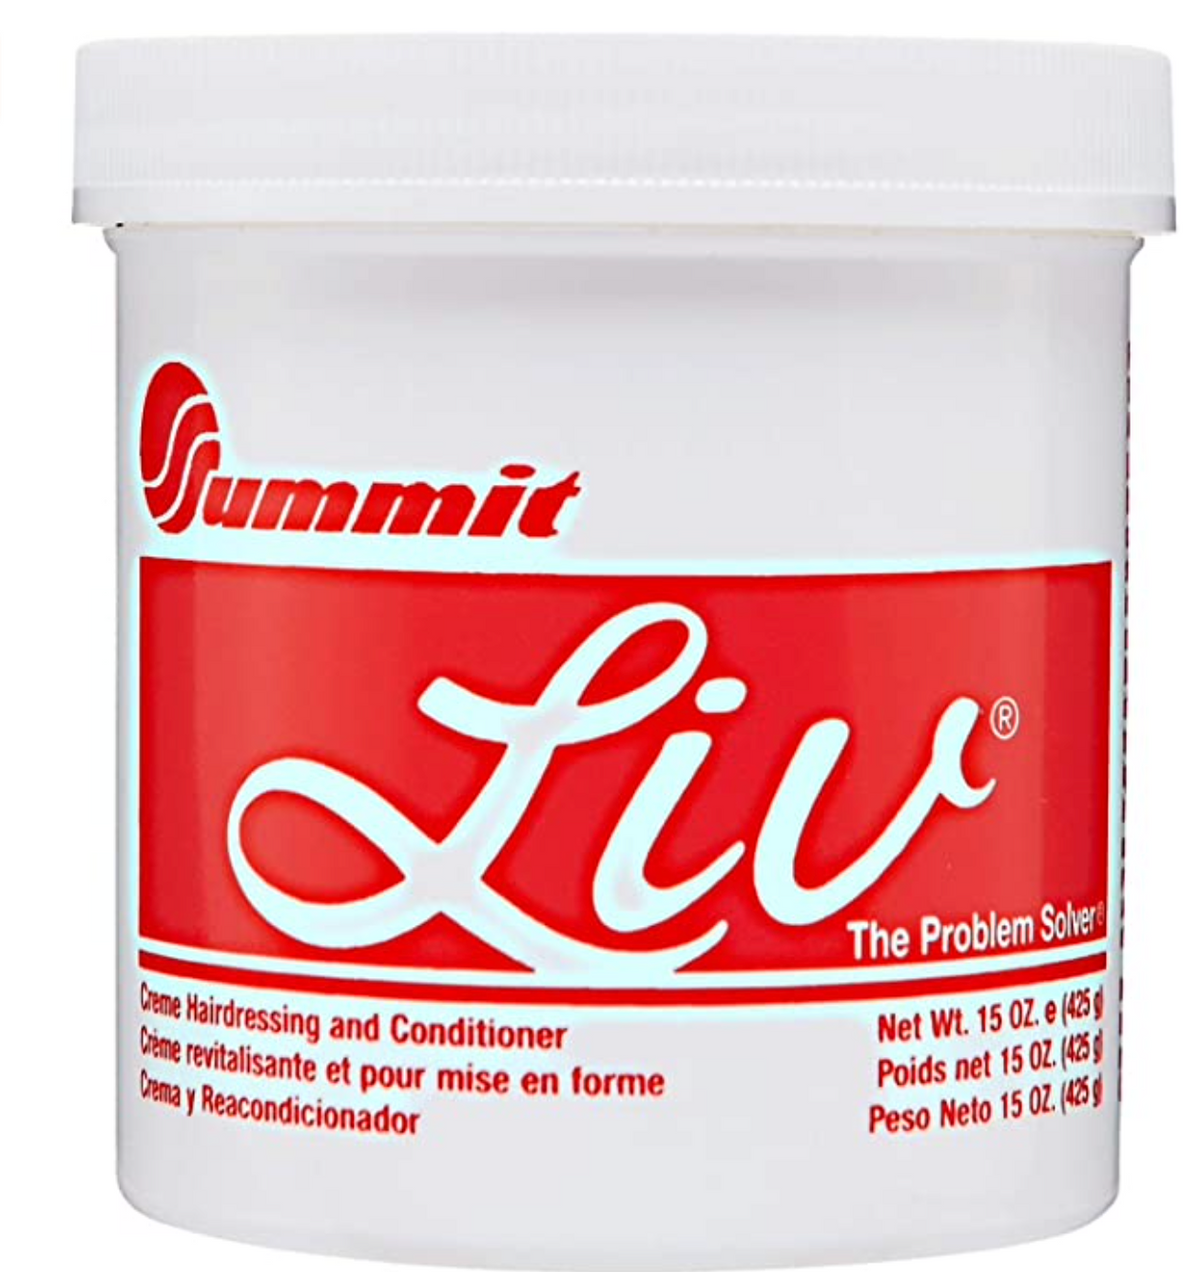 Liv Creme Hairdressing and Conditioner 8 oz - BPolished Beauty Supply